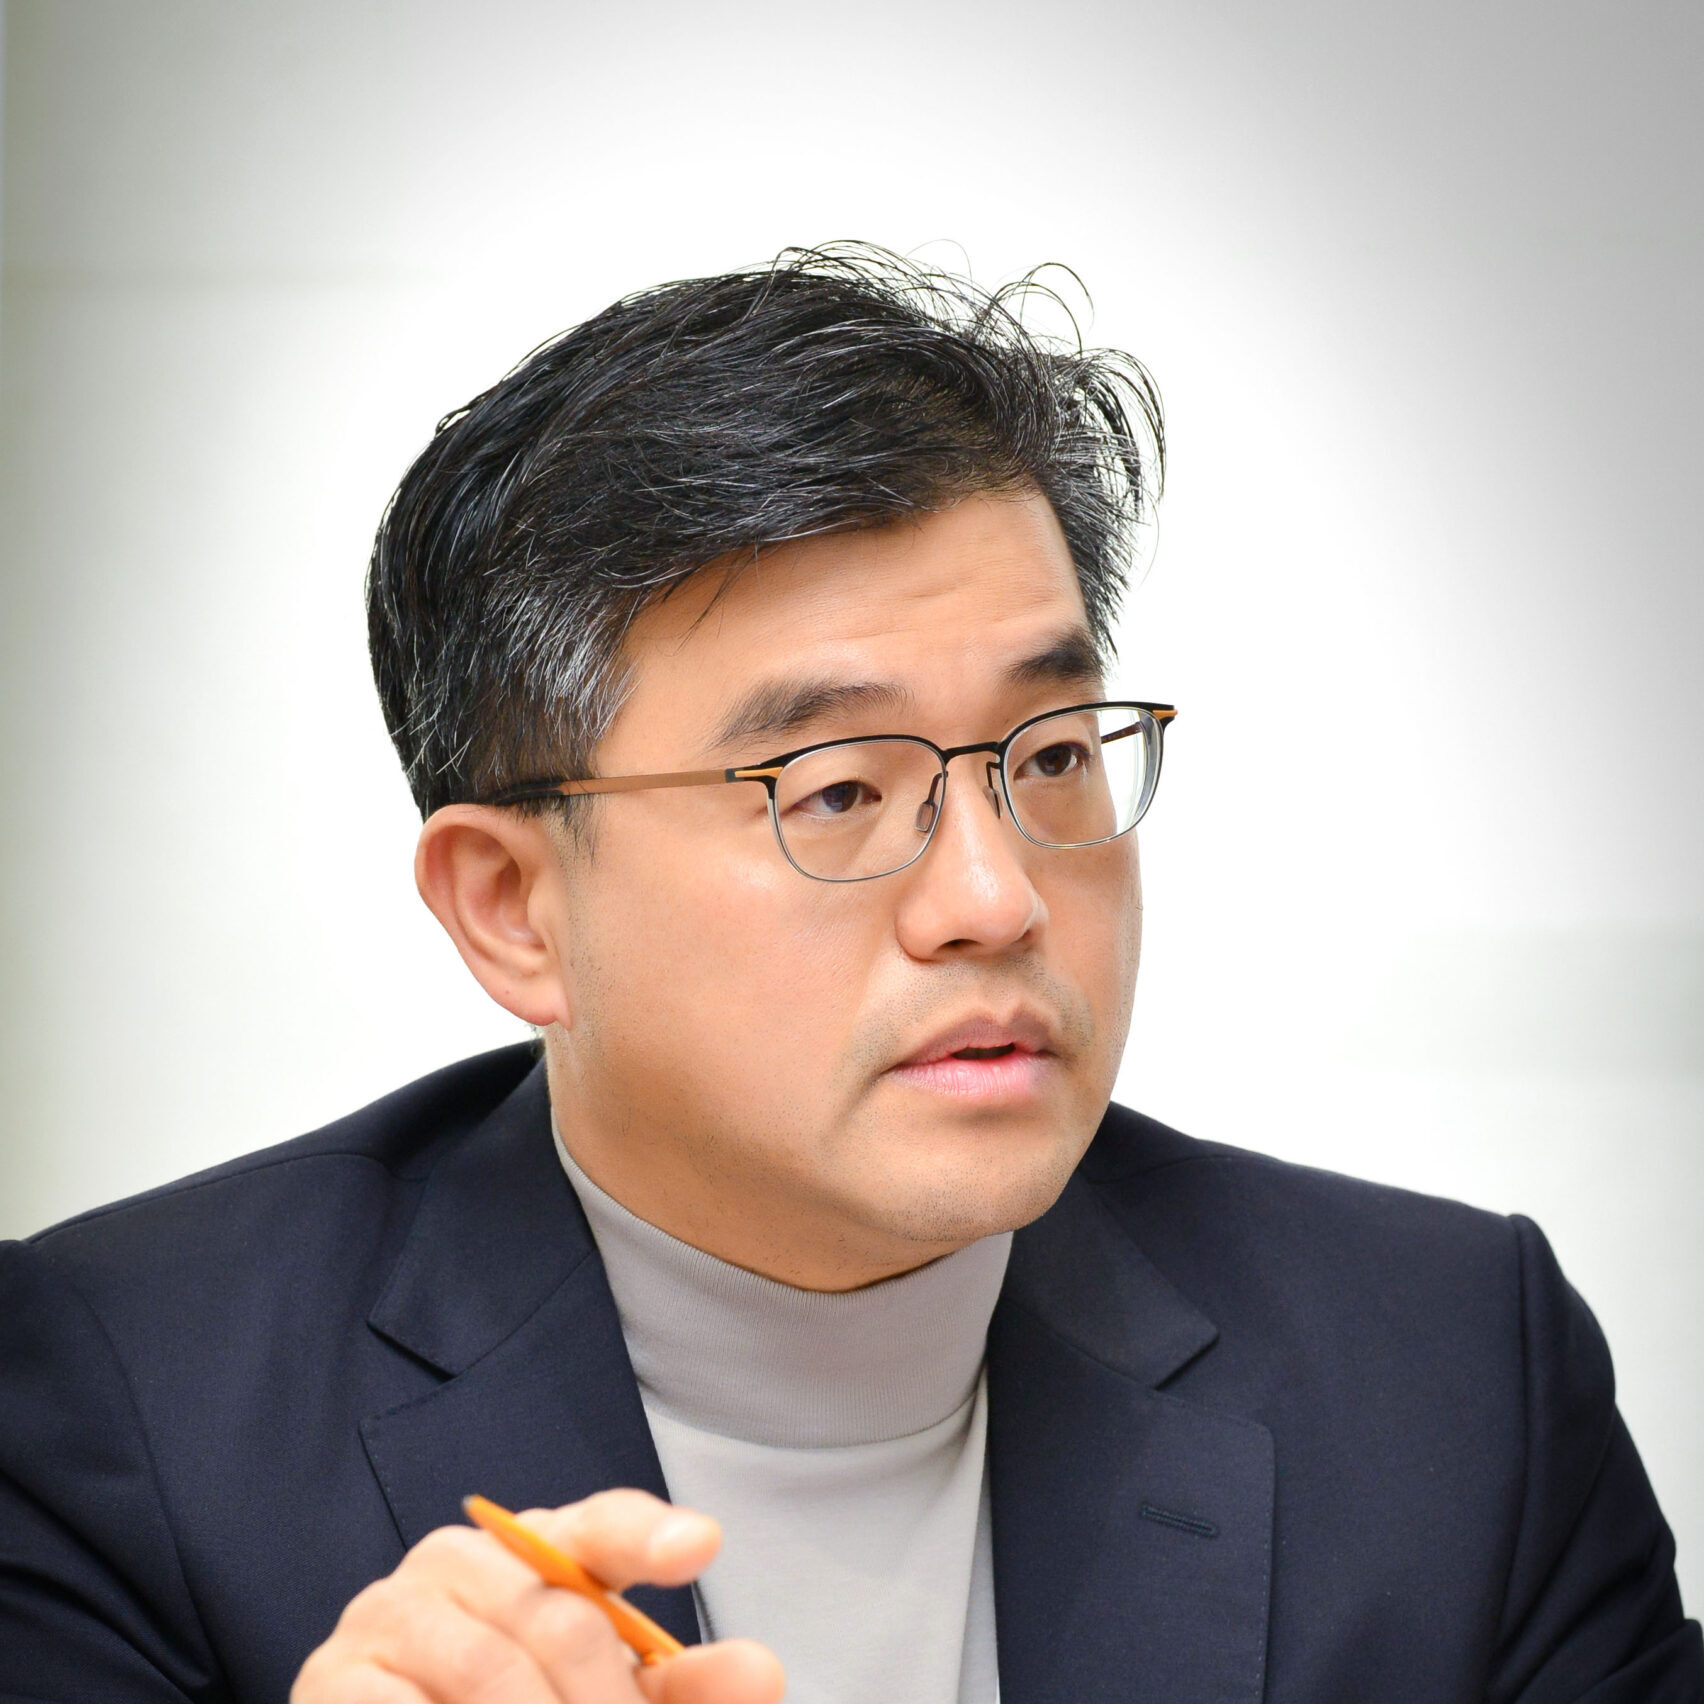 lg-energy-solutions-new-chief-data-officer-to-lead-digital-transformation-of-battery-manufacturing-unit_1.jpg